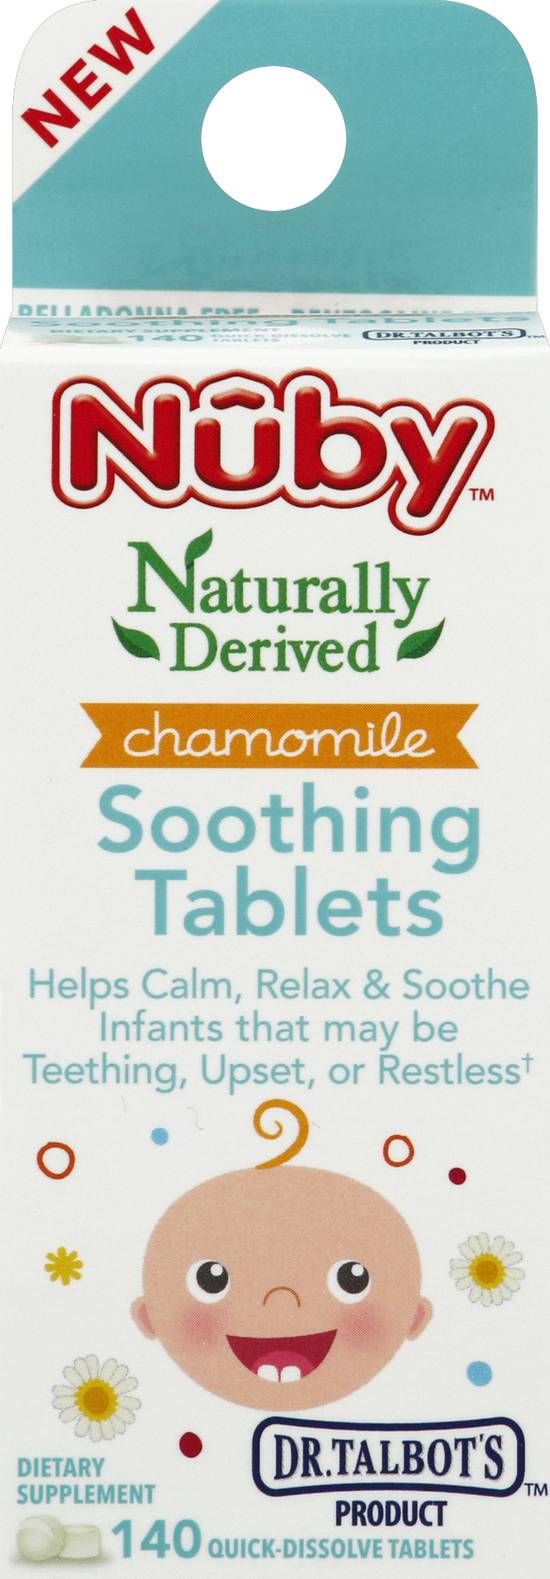 Dr. Talbot's Nuby Naturally Derived Chamomile Soothing Tablets (140 ct)